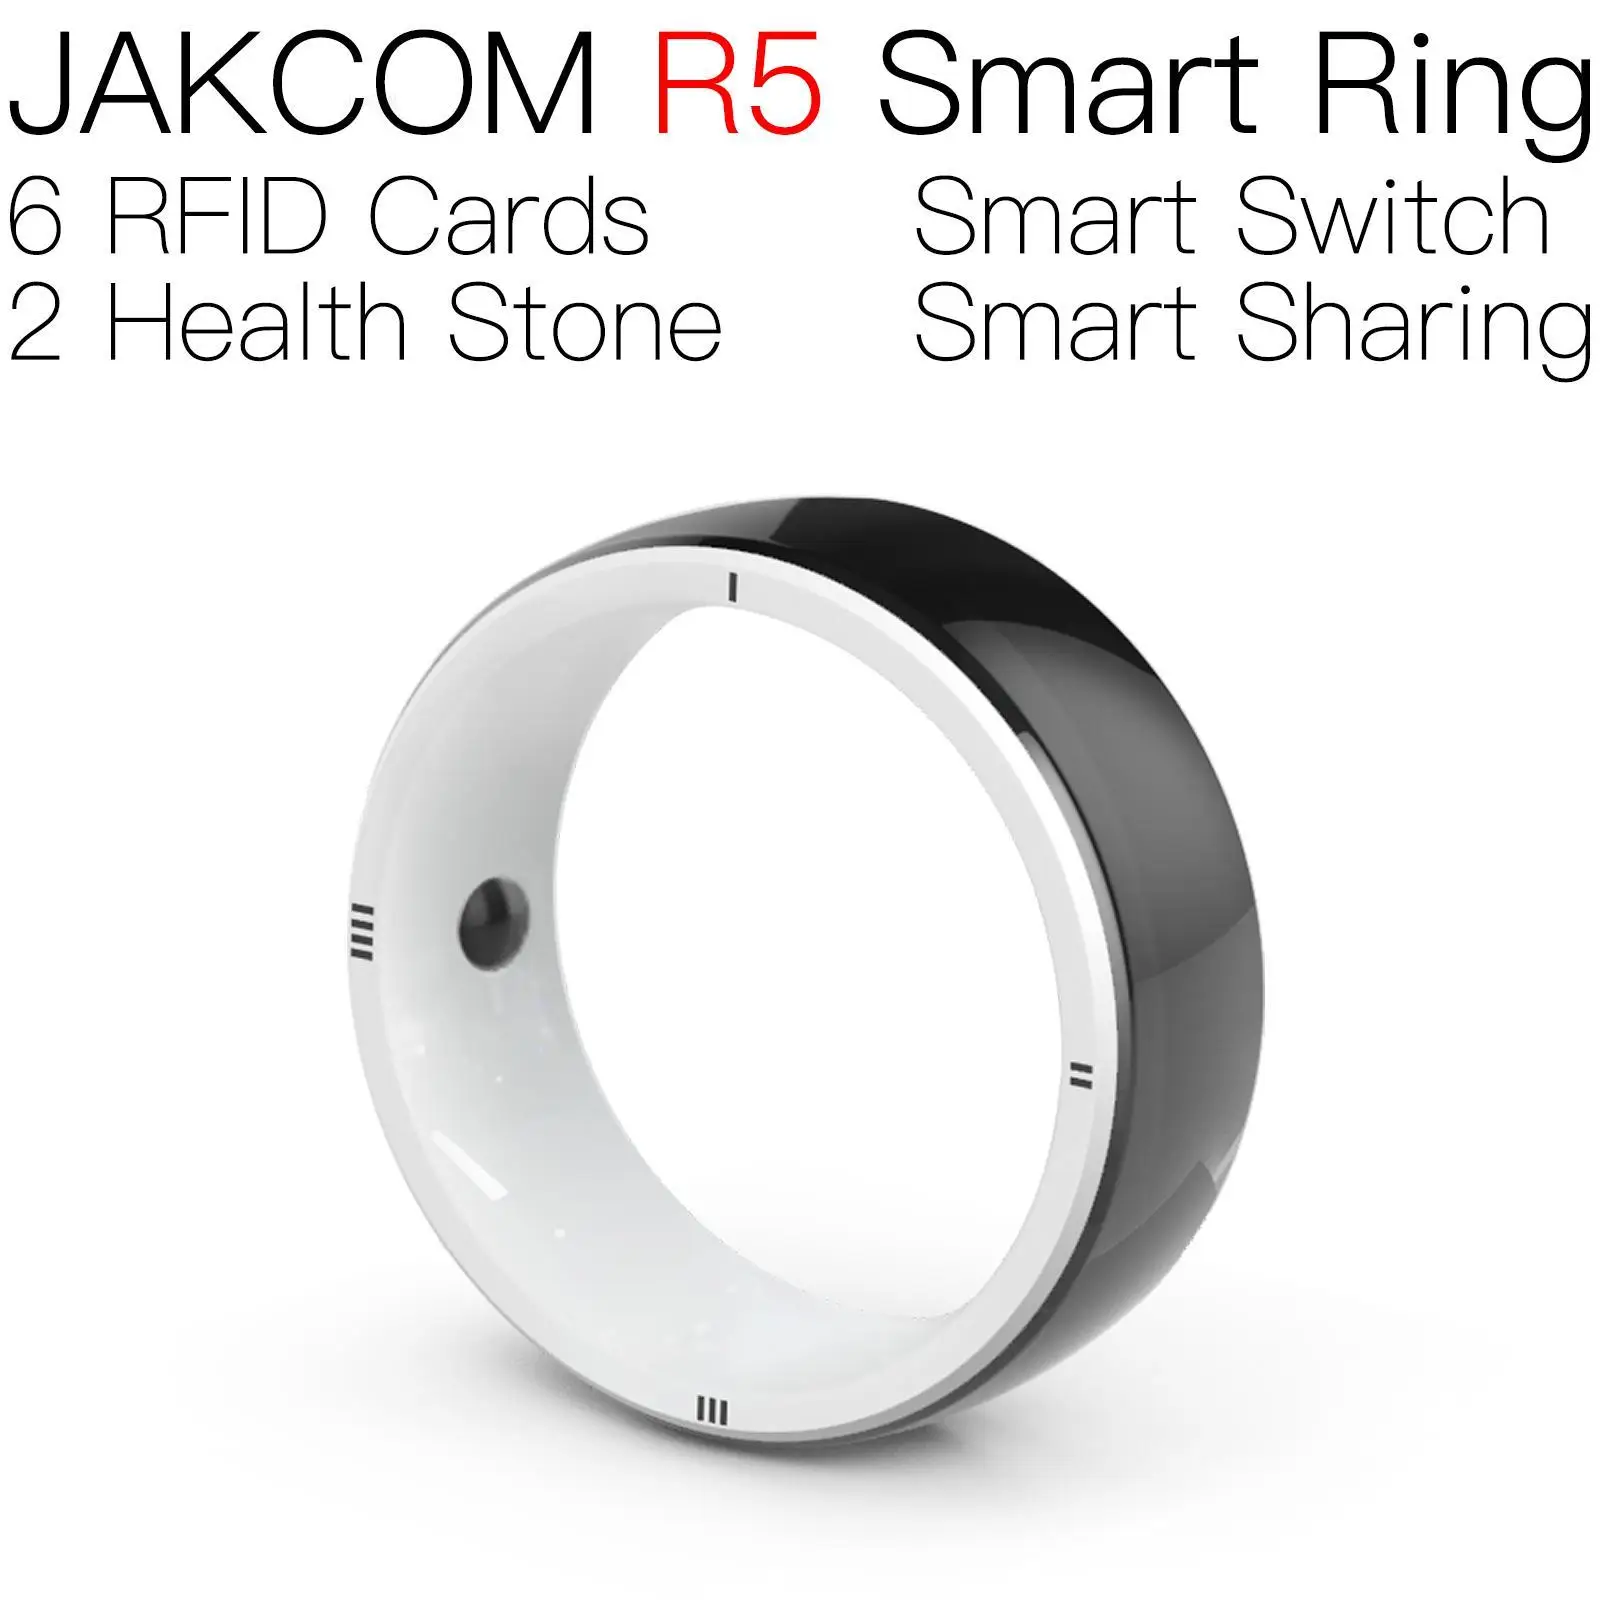 

JAKCOM R5 Smart Ring Super value than keychain nfc 125khz rfid duplicator capsule chip mtouch microchip micro puce card